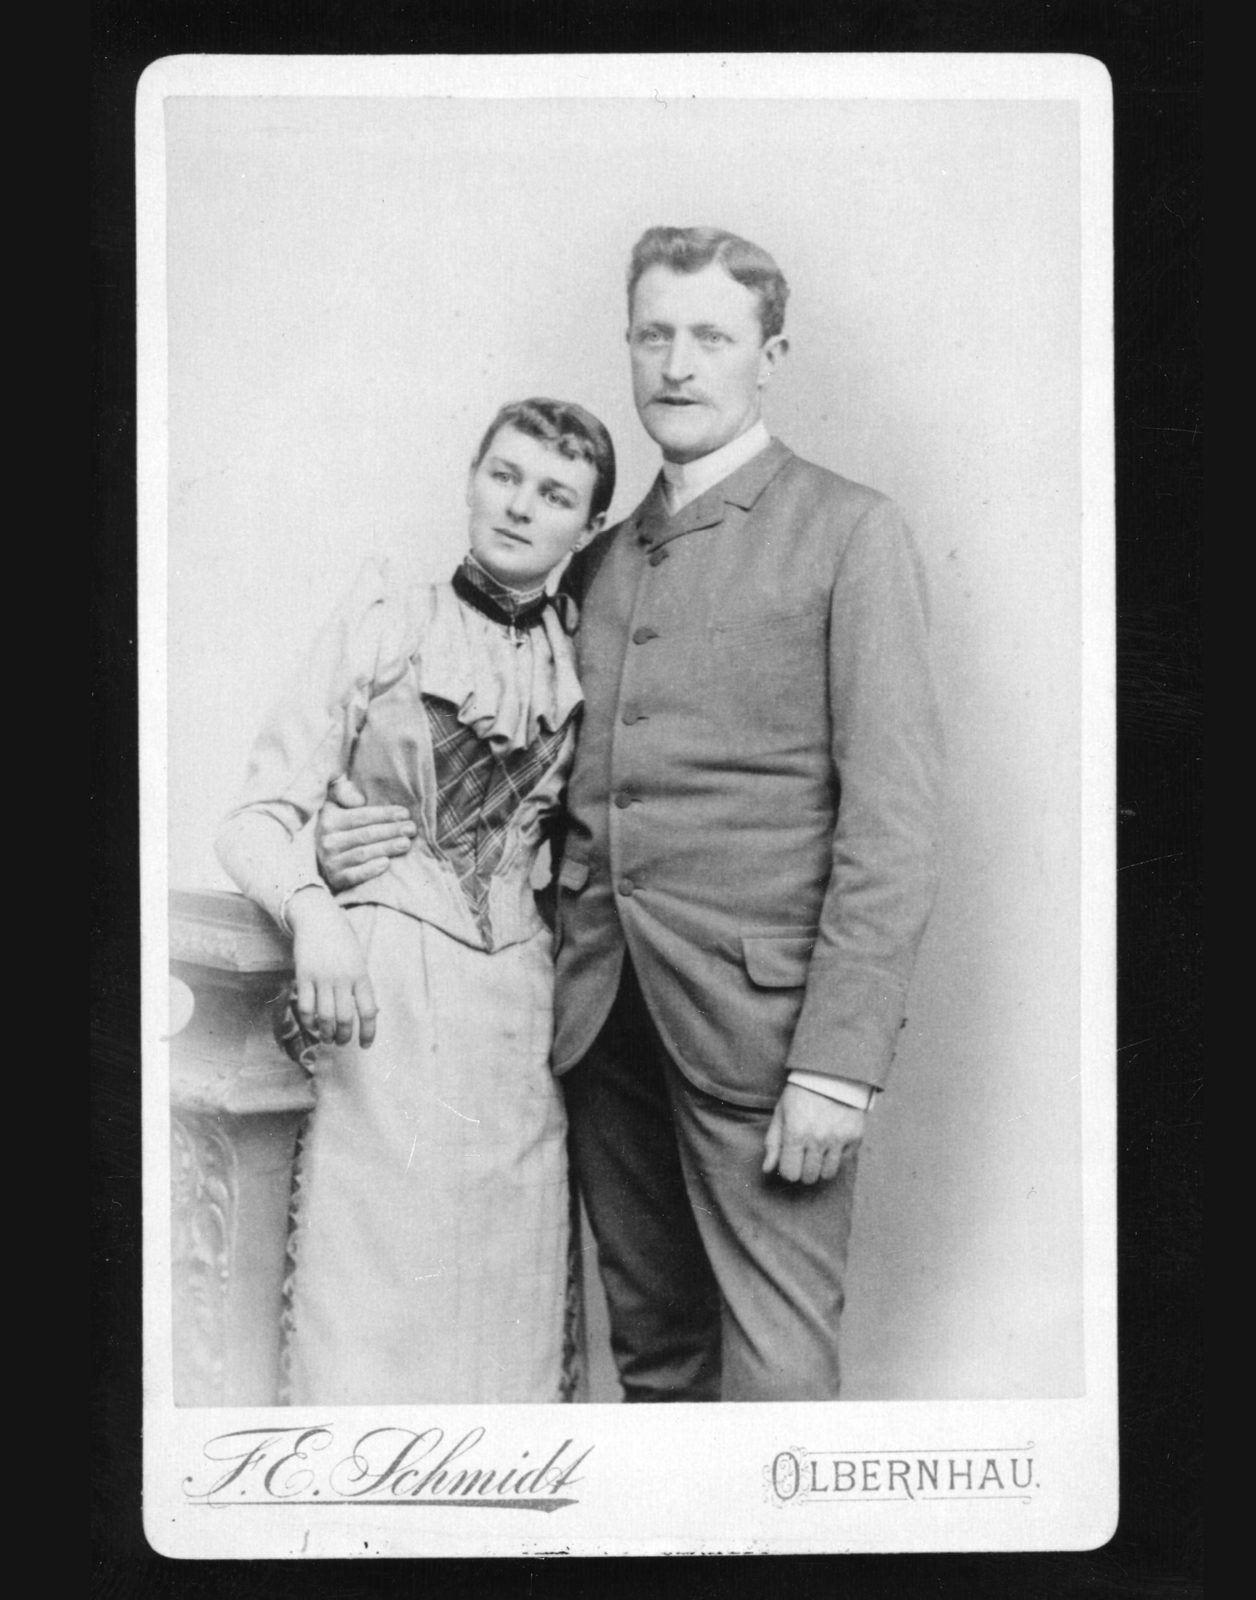 Late 19th century studio photo, young well-dressed couple, Ingvar Kamprad’s paternal grandparents in Germany.